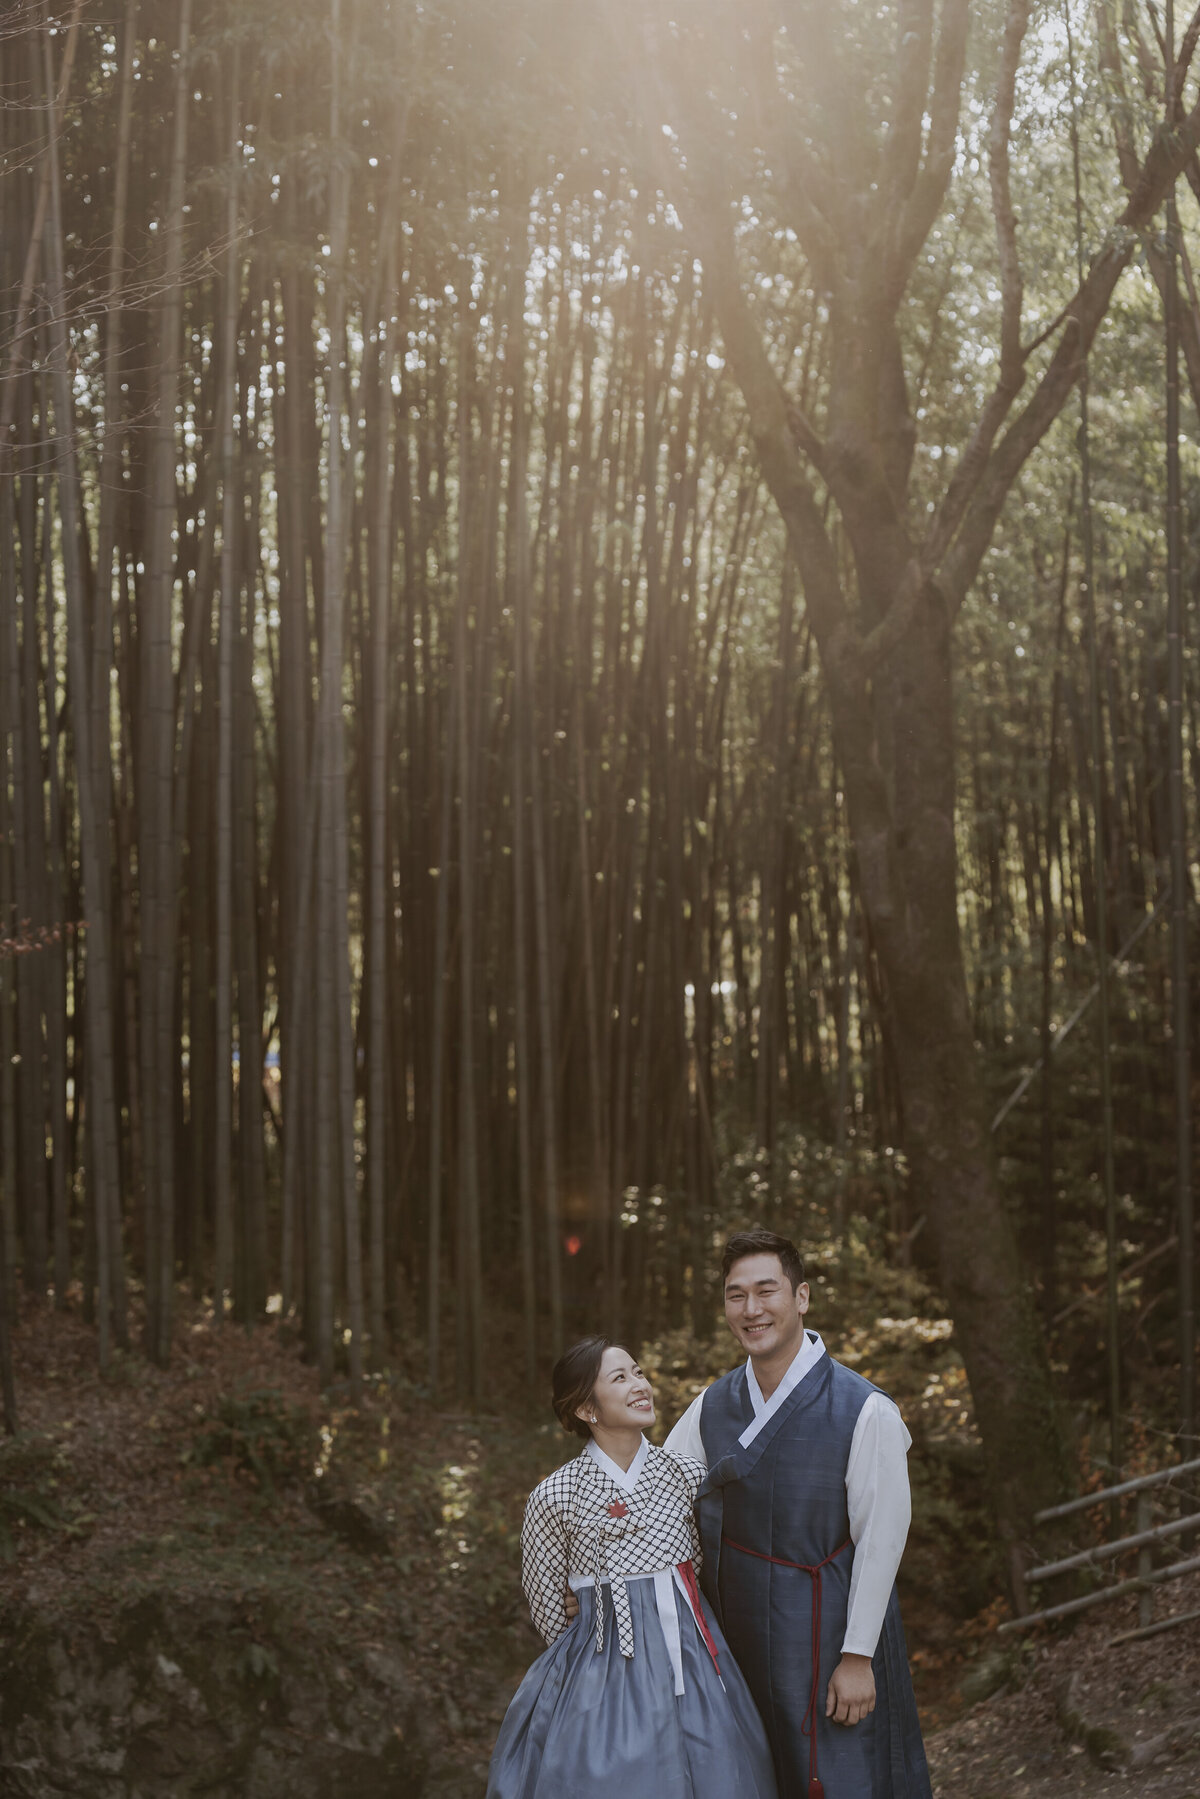 the bride looking at the groom while smiling in soswaewon garden in damyang south korea